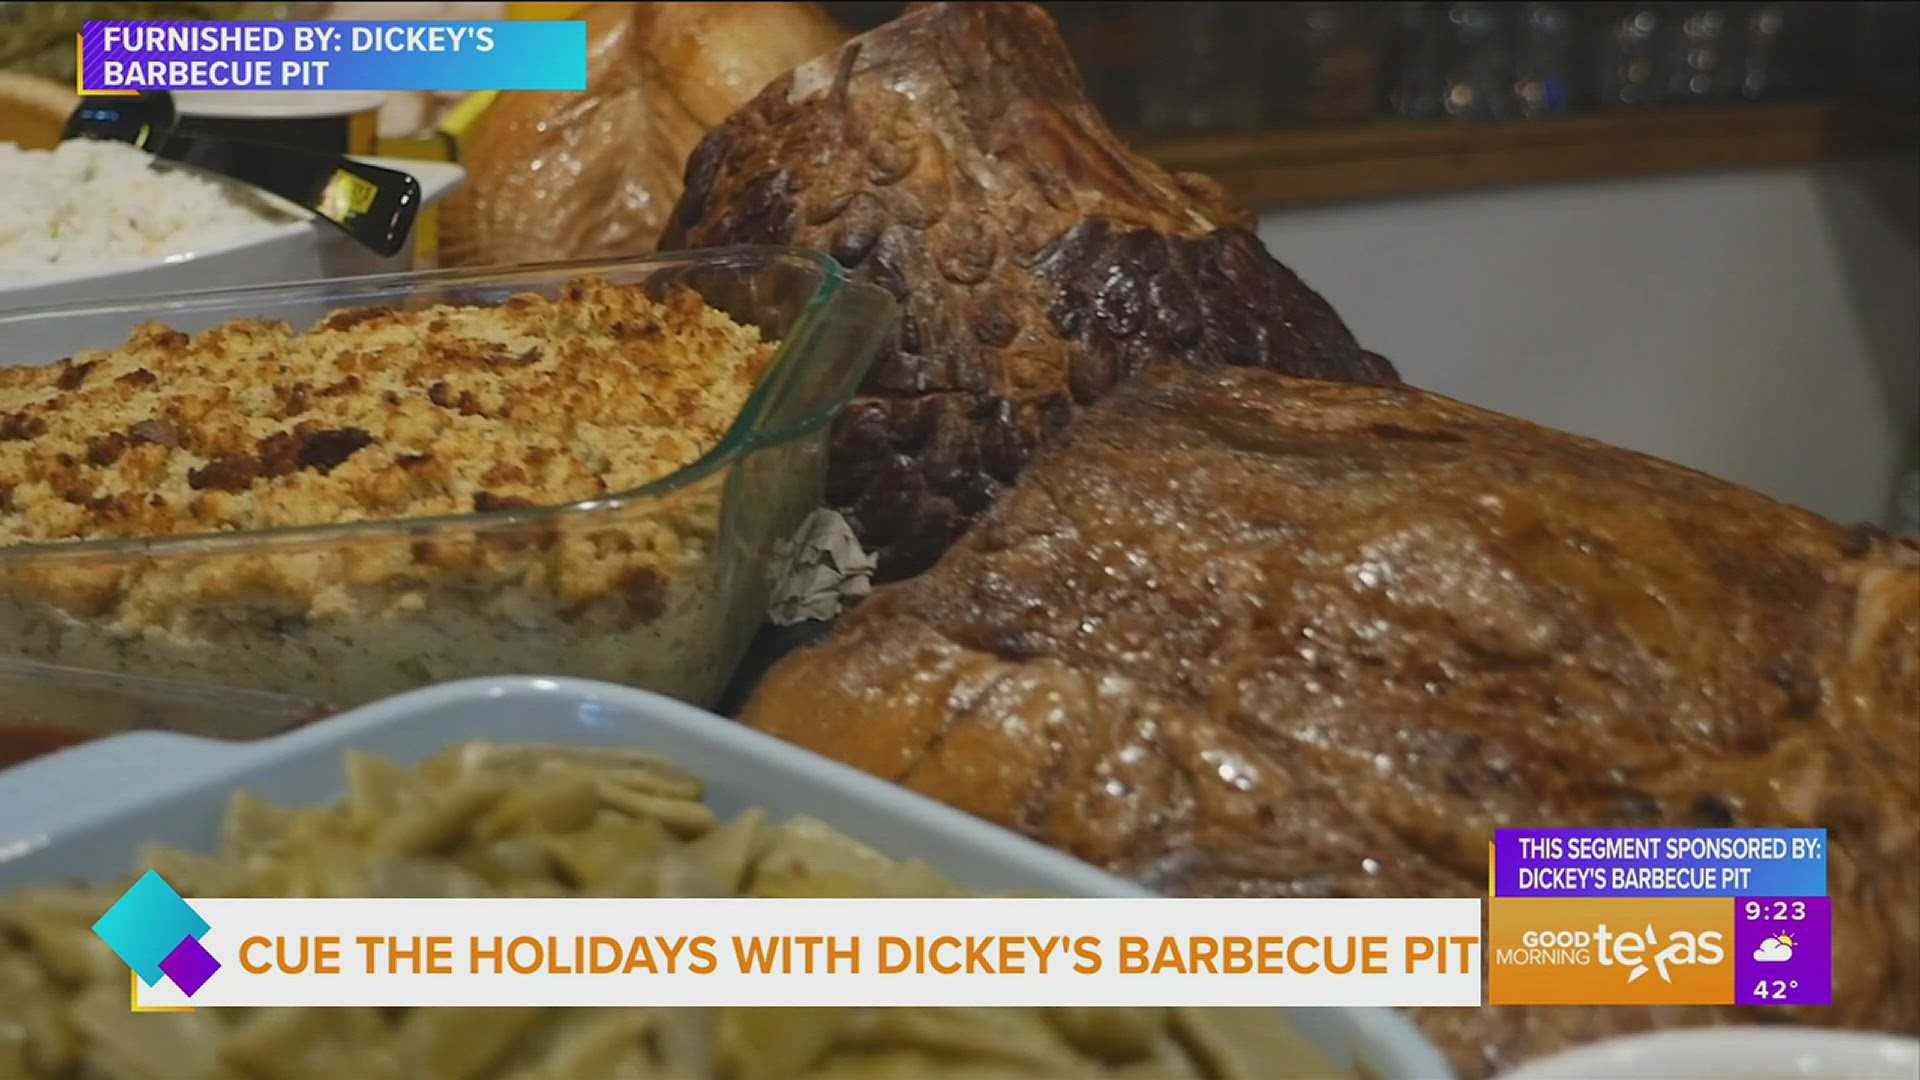 Find out how Dickey's Barbecue Pit can help you take a break this holiday season. Download the Dickey's App or go to dickeys.com for more information.